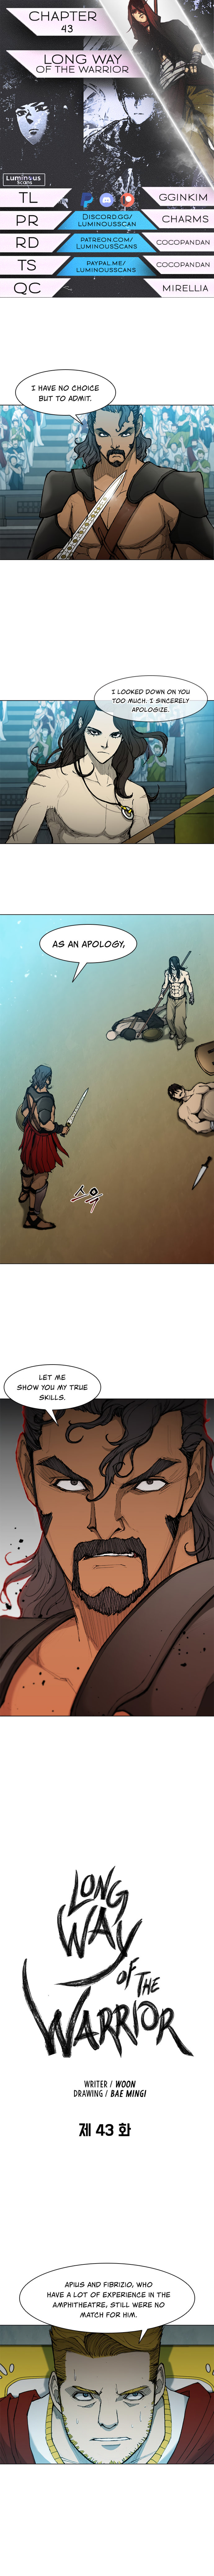 The Long Way Of The Warrior - Chapter 43 Page 1